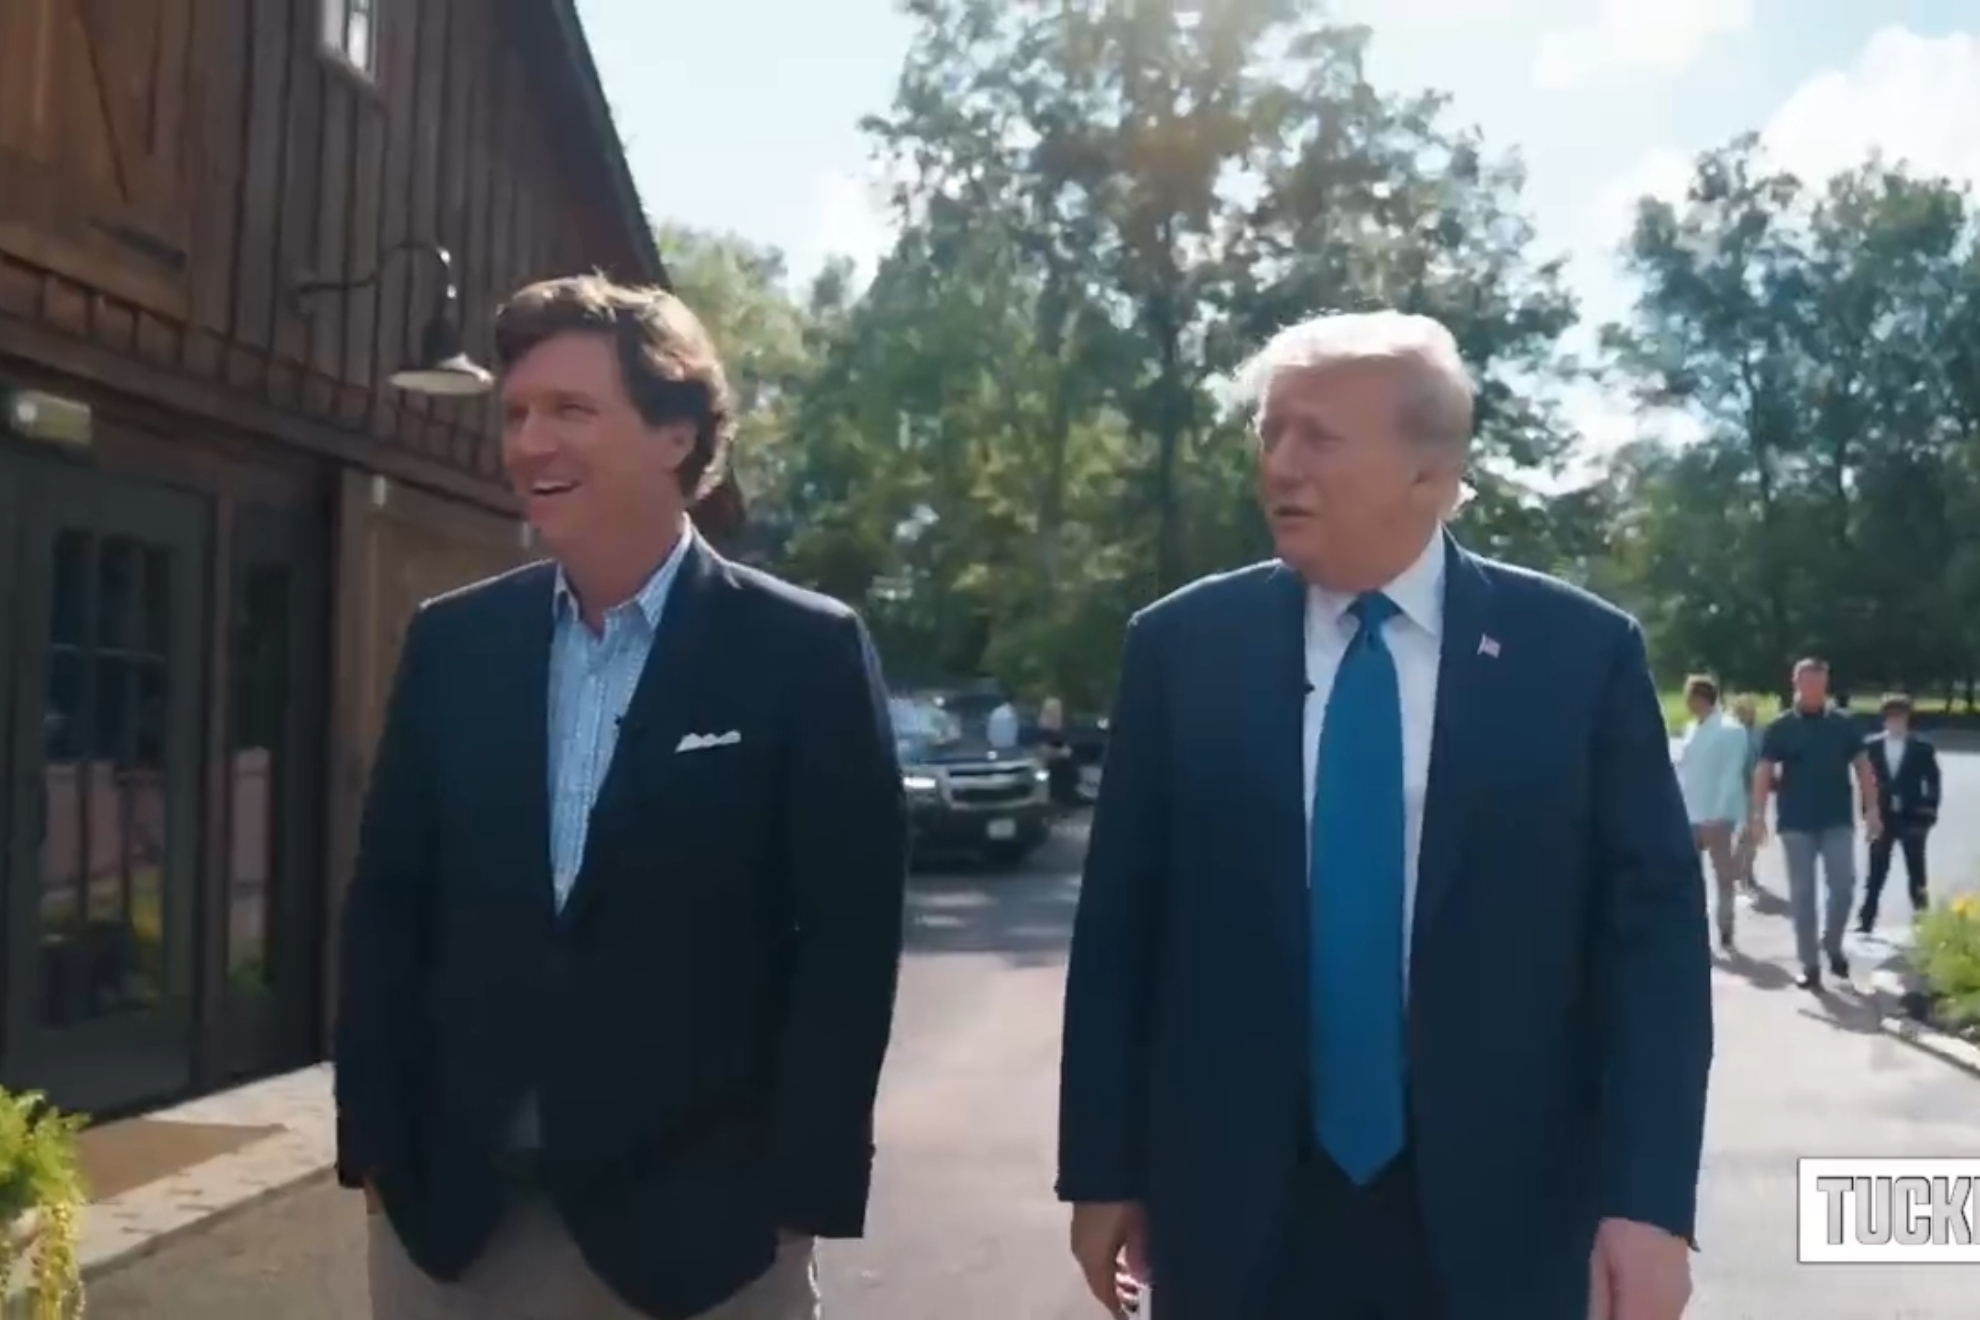 Donald Trump and Tucker Carlson debate over the current state of America